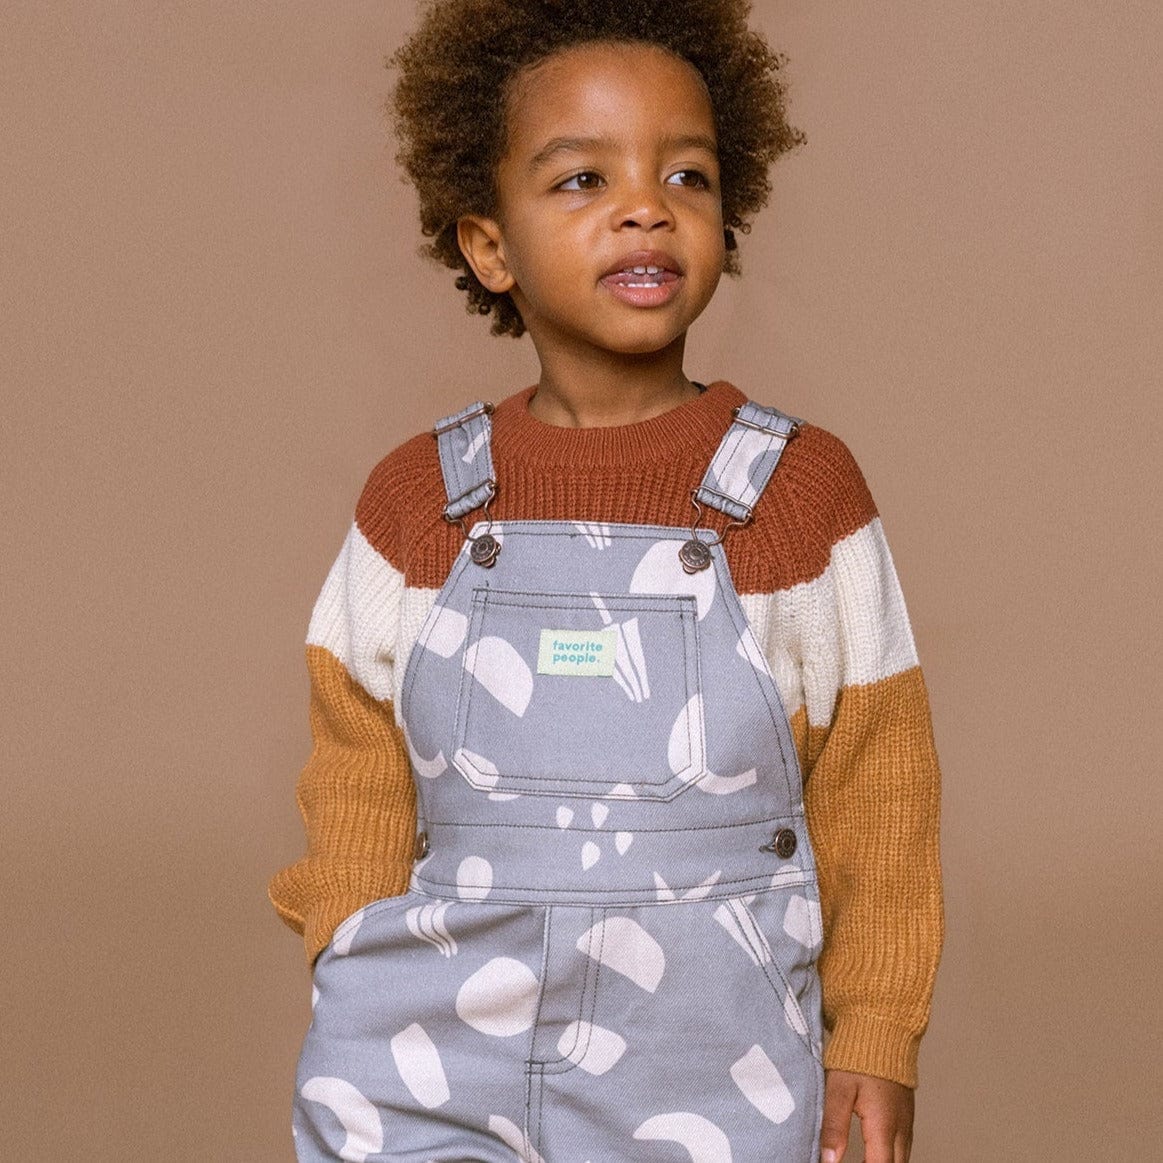 Favorite People Dungarees Kids 'How To Catch A Star' Dungarees (Grey/White)